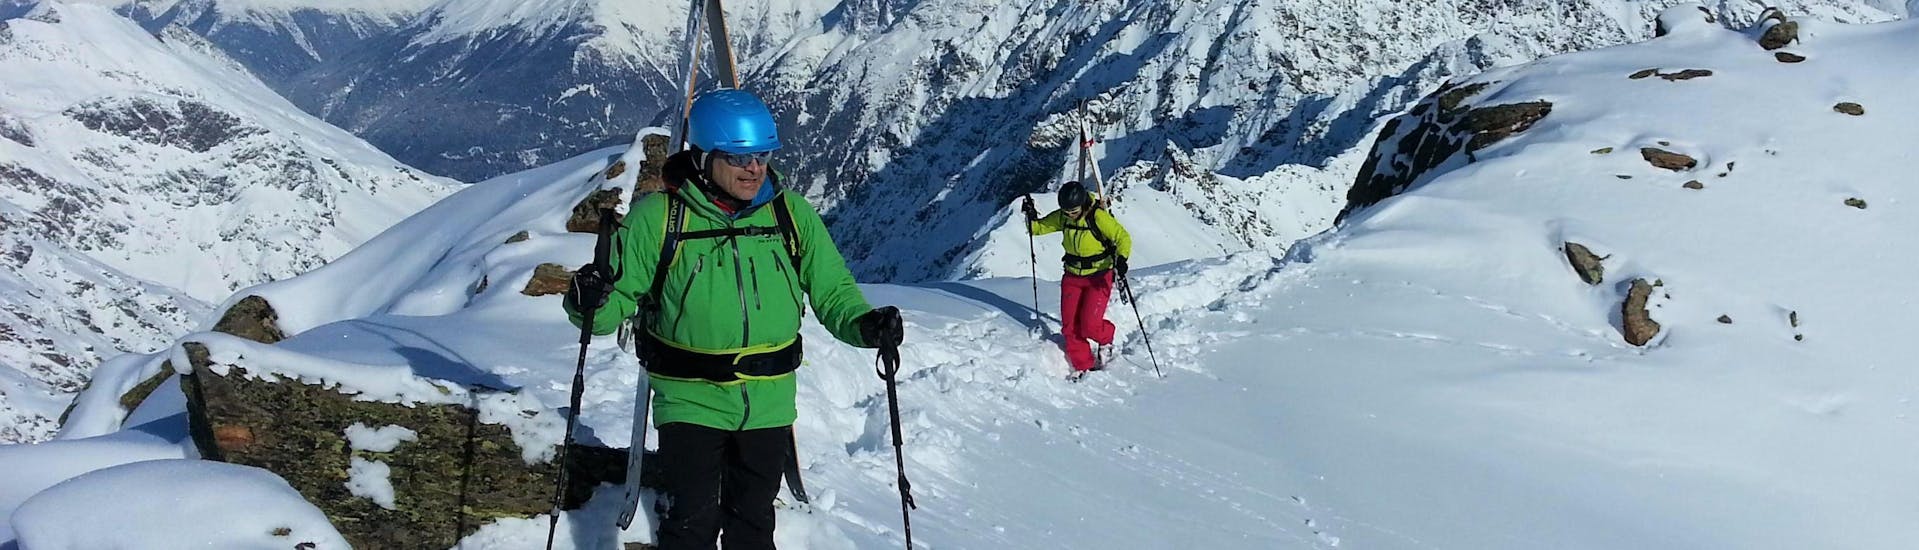 A private ski touring guide from the ski school Ski- und Snowboardschule SNOWLINES Sölden is showing the magnificent view of the snowy peaks of the ski resort of Sölden to a participant of the Private Ski Touring Guide.